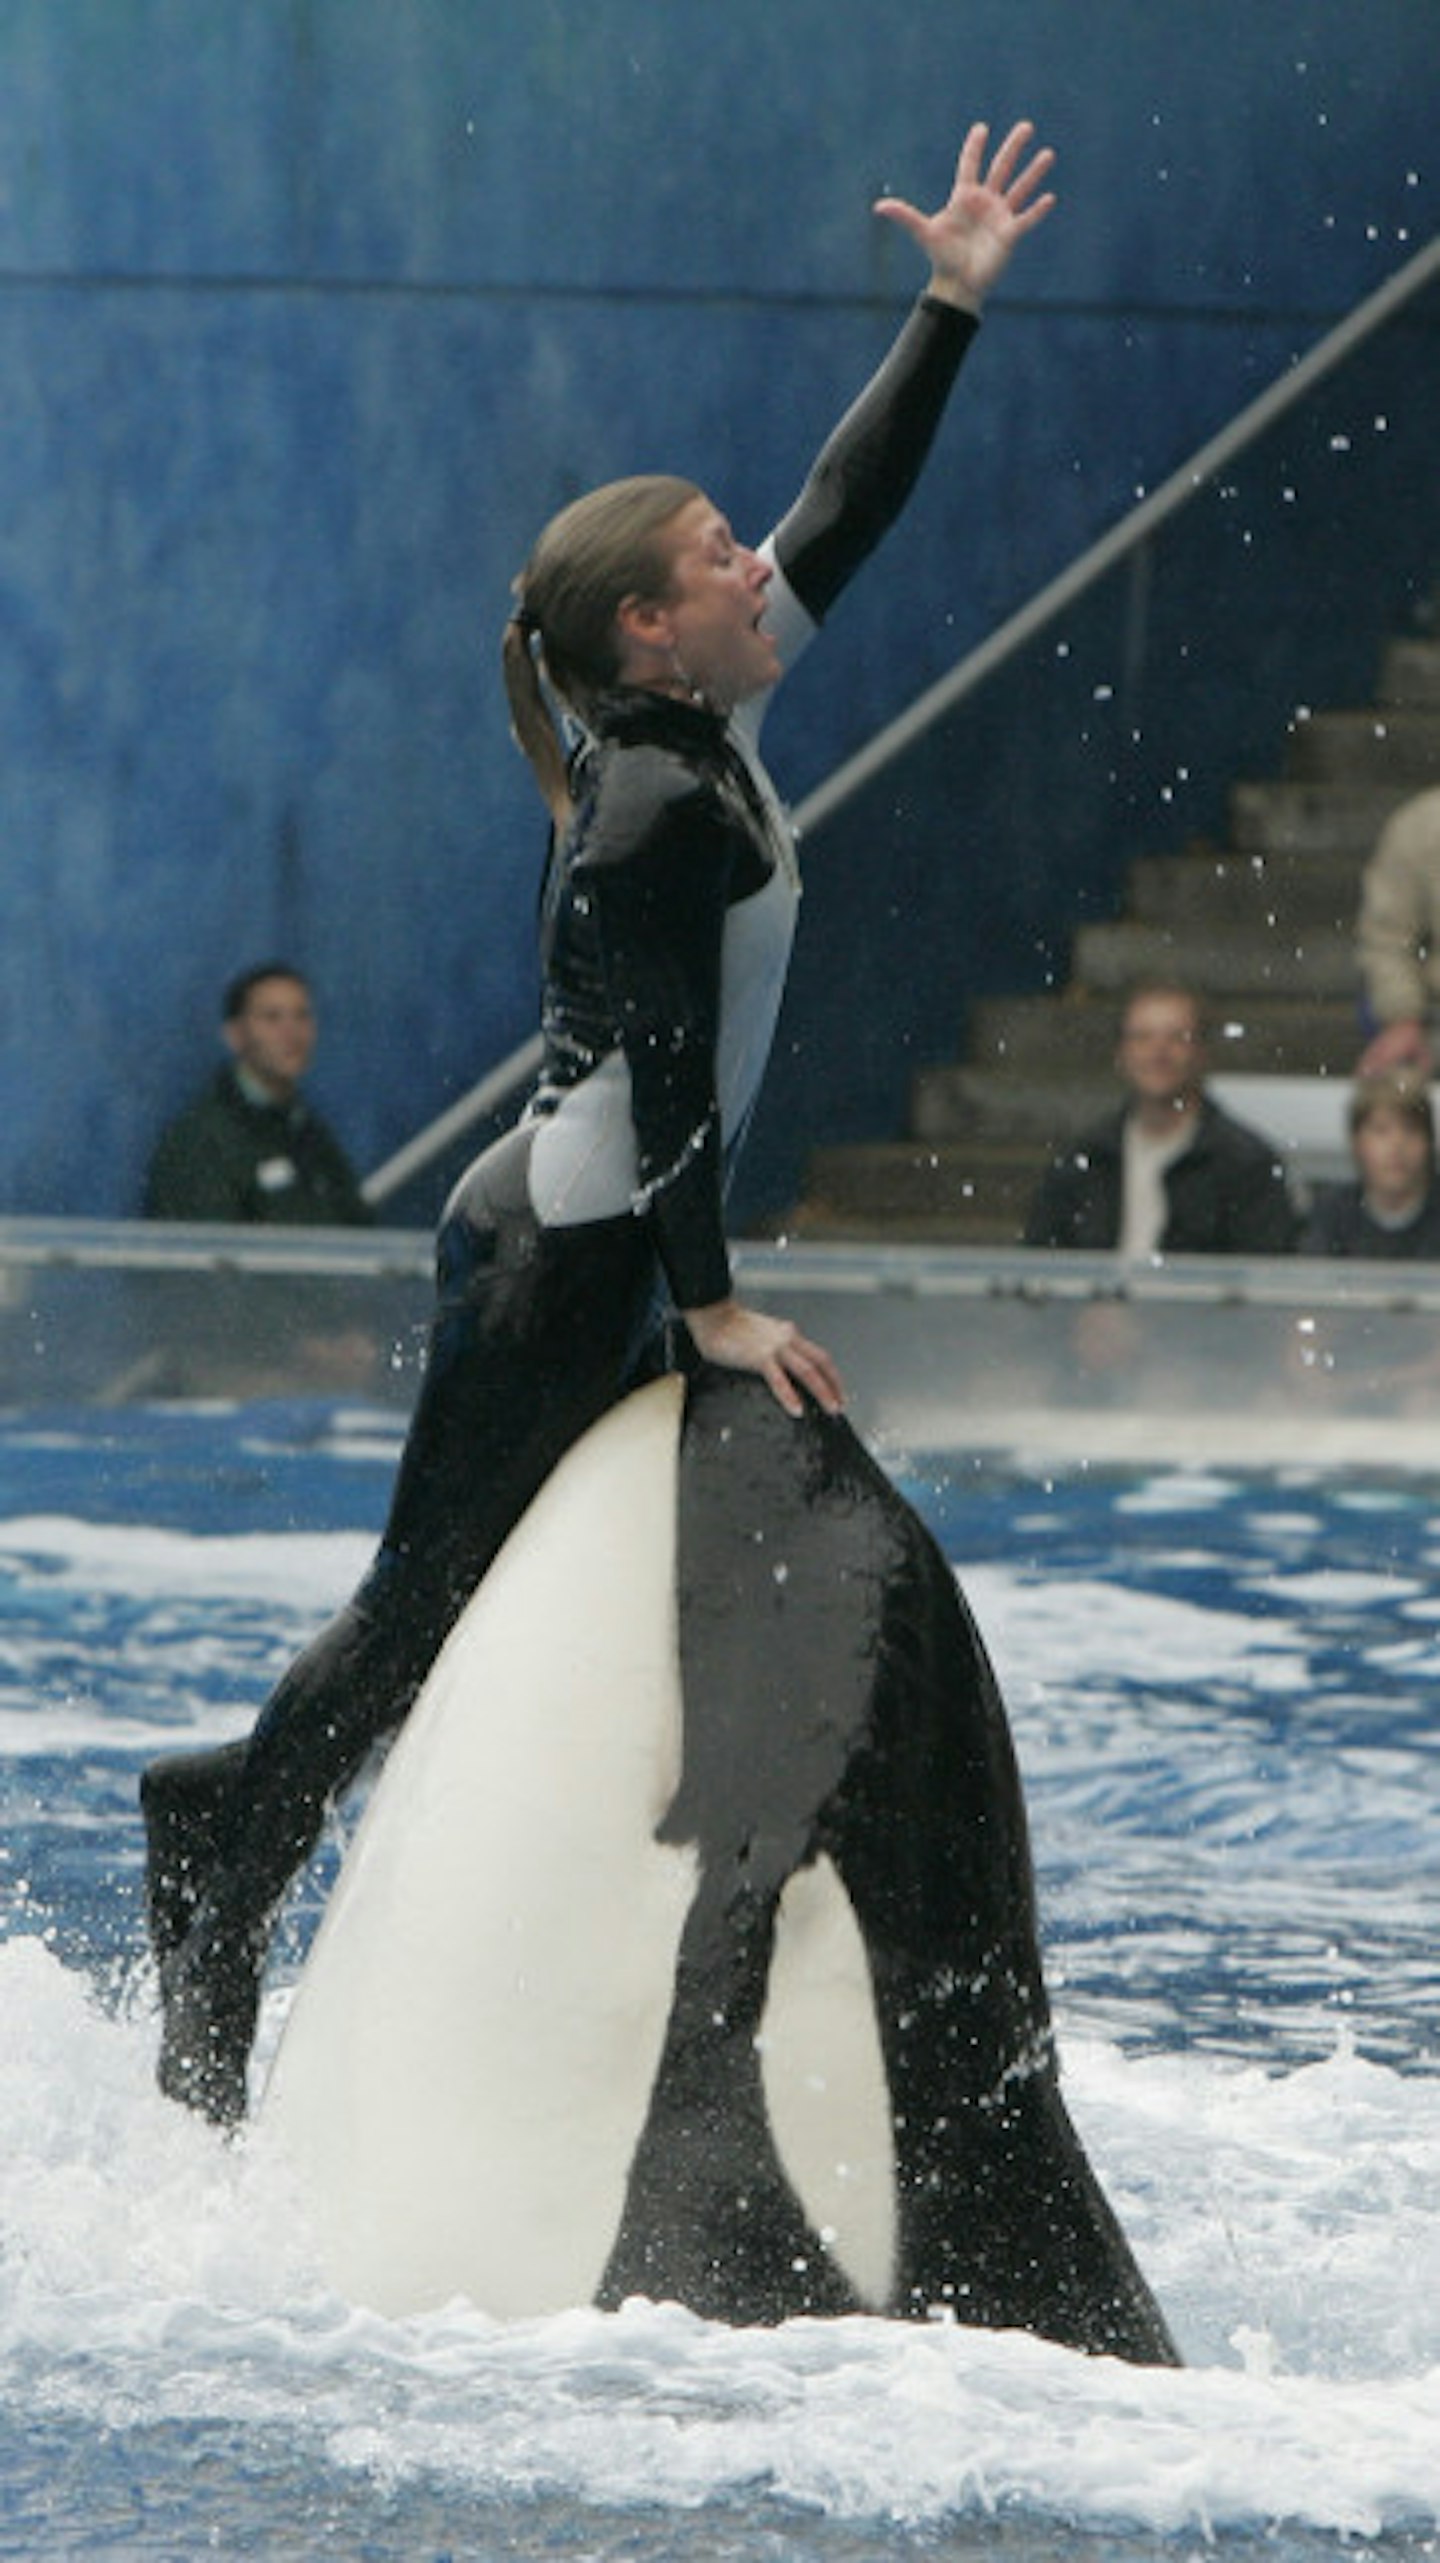 Documentary Black Fish documented the treatment of killer whales at SeaWorld, and the deaths of several trainers including Dawn Brancheau